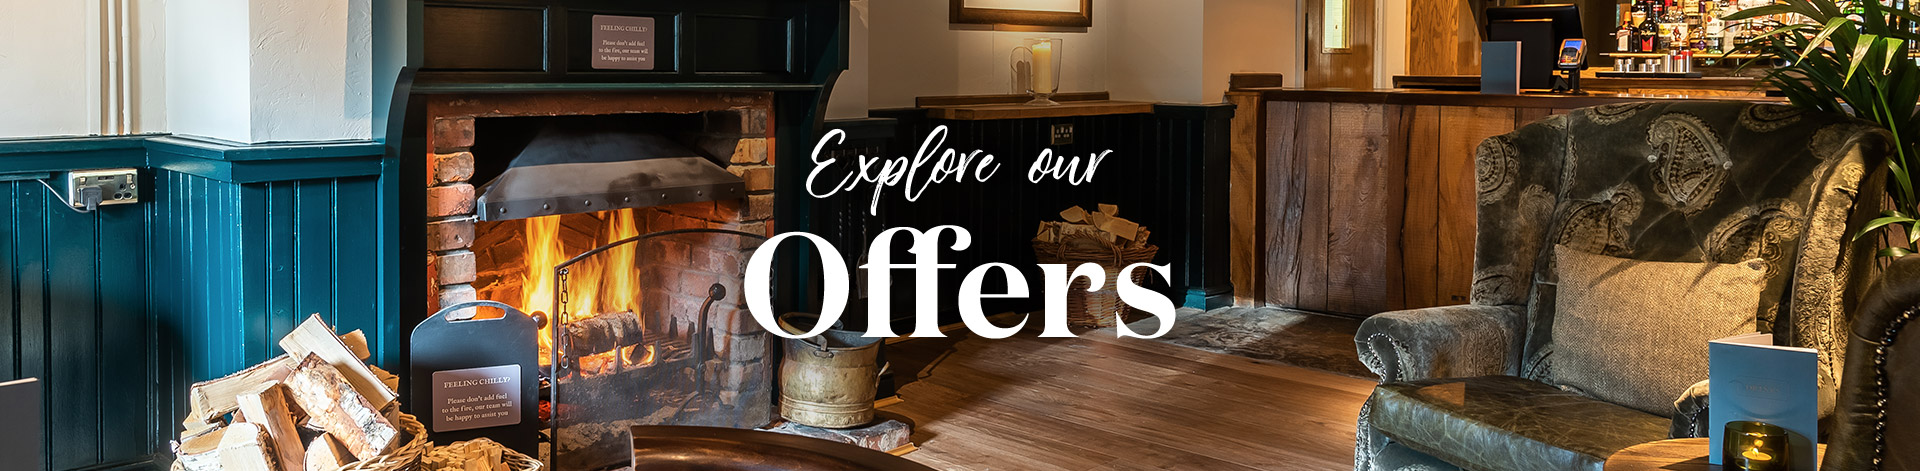 Our latest offers at The Hesketh Arms